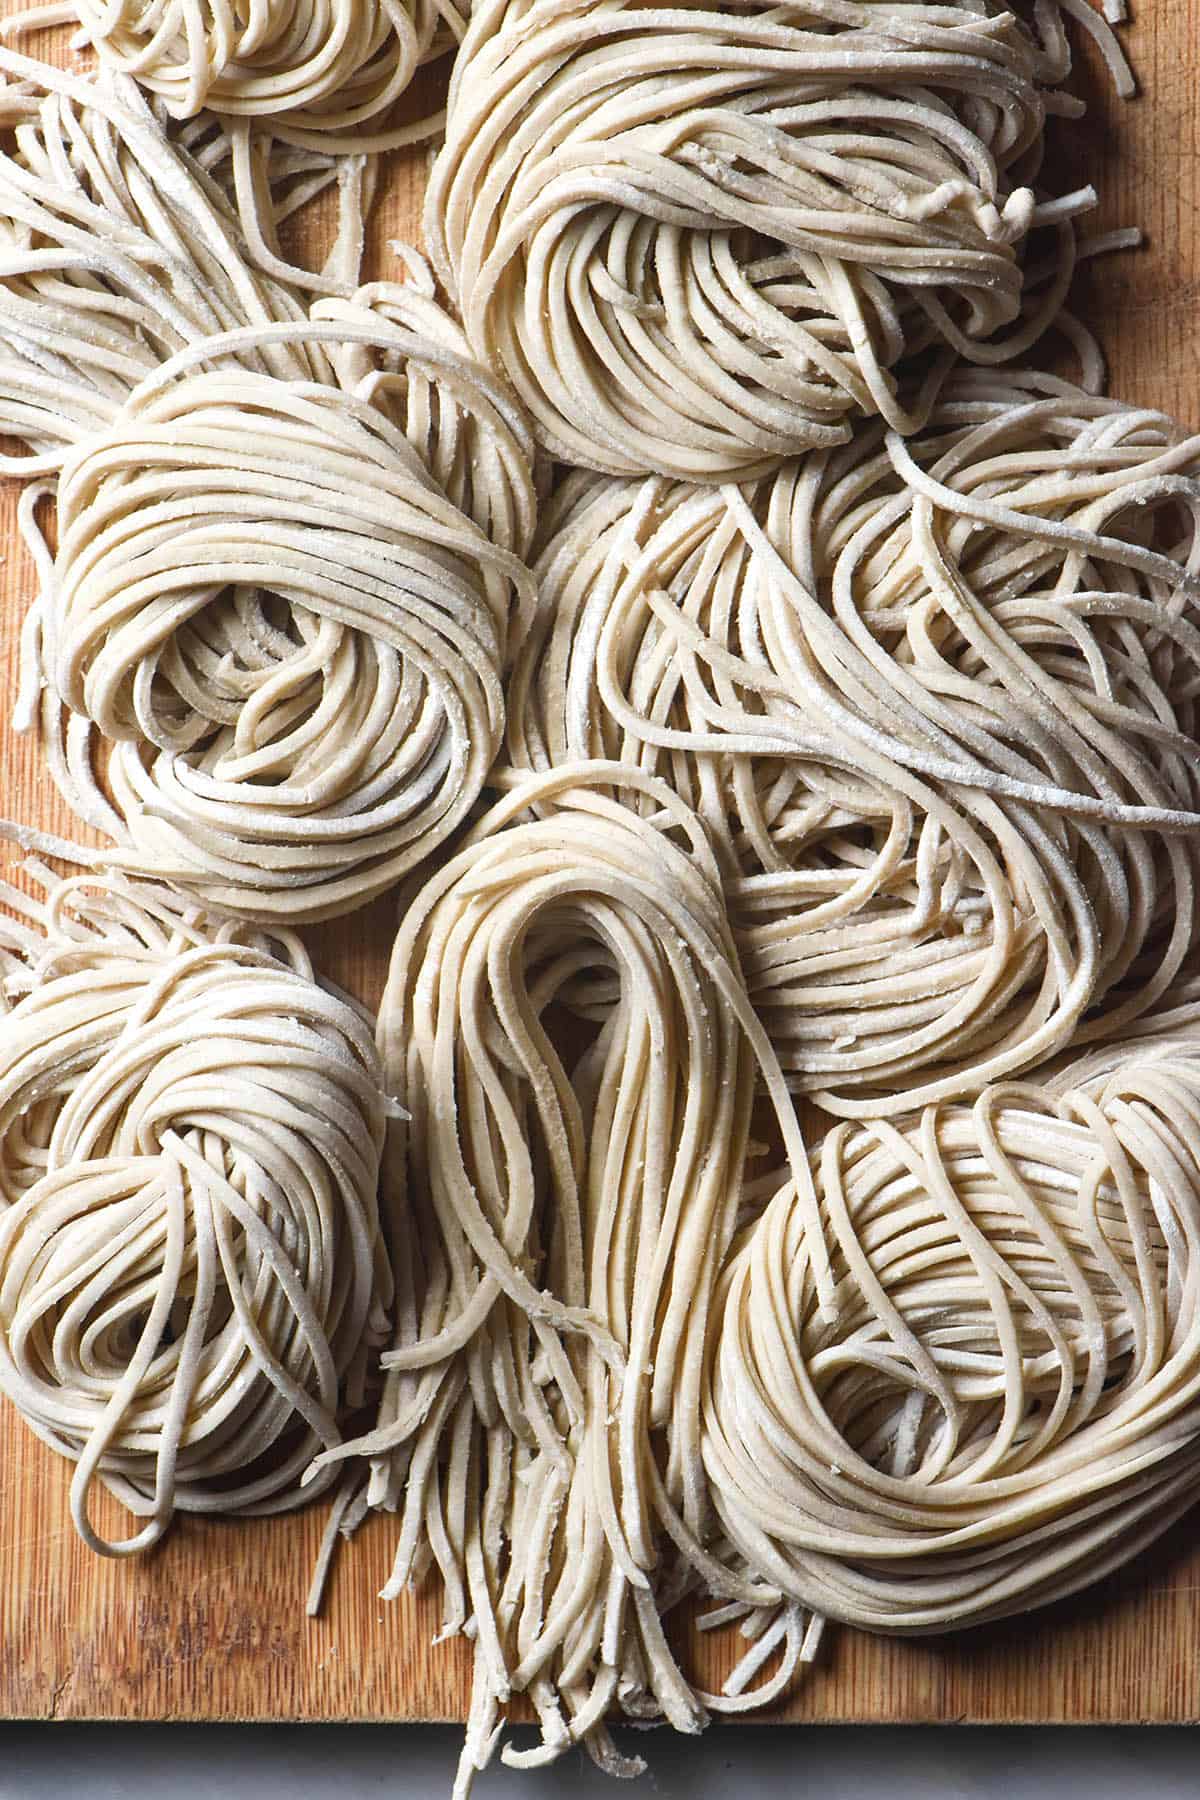 An aerial image of nests of gluten free soba noodles casually arranged on a wooden backdrop